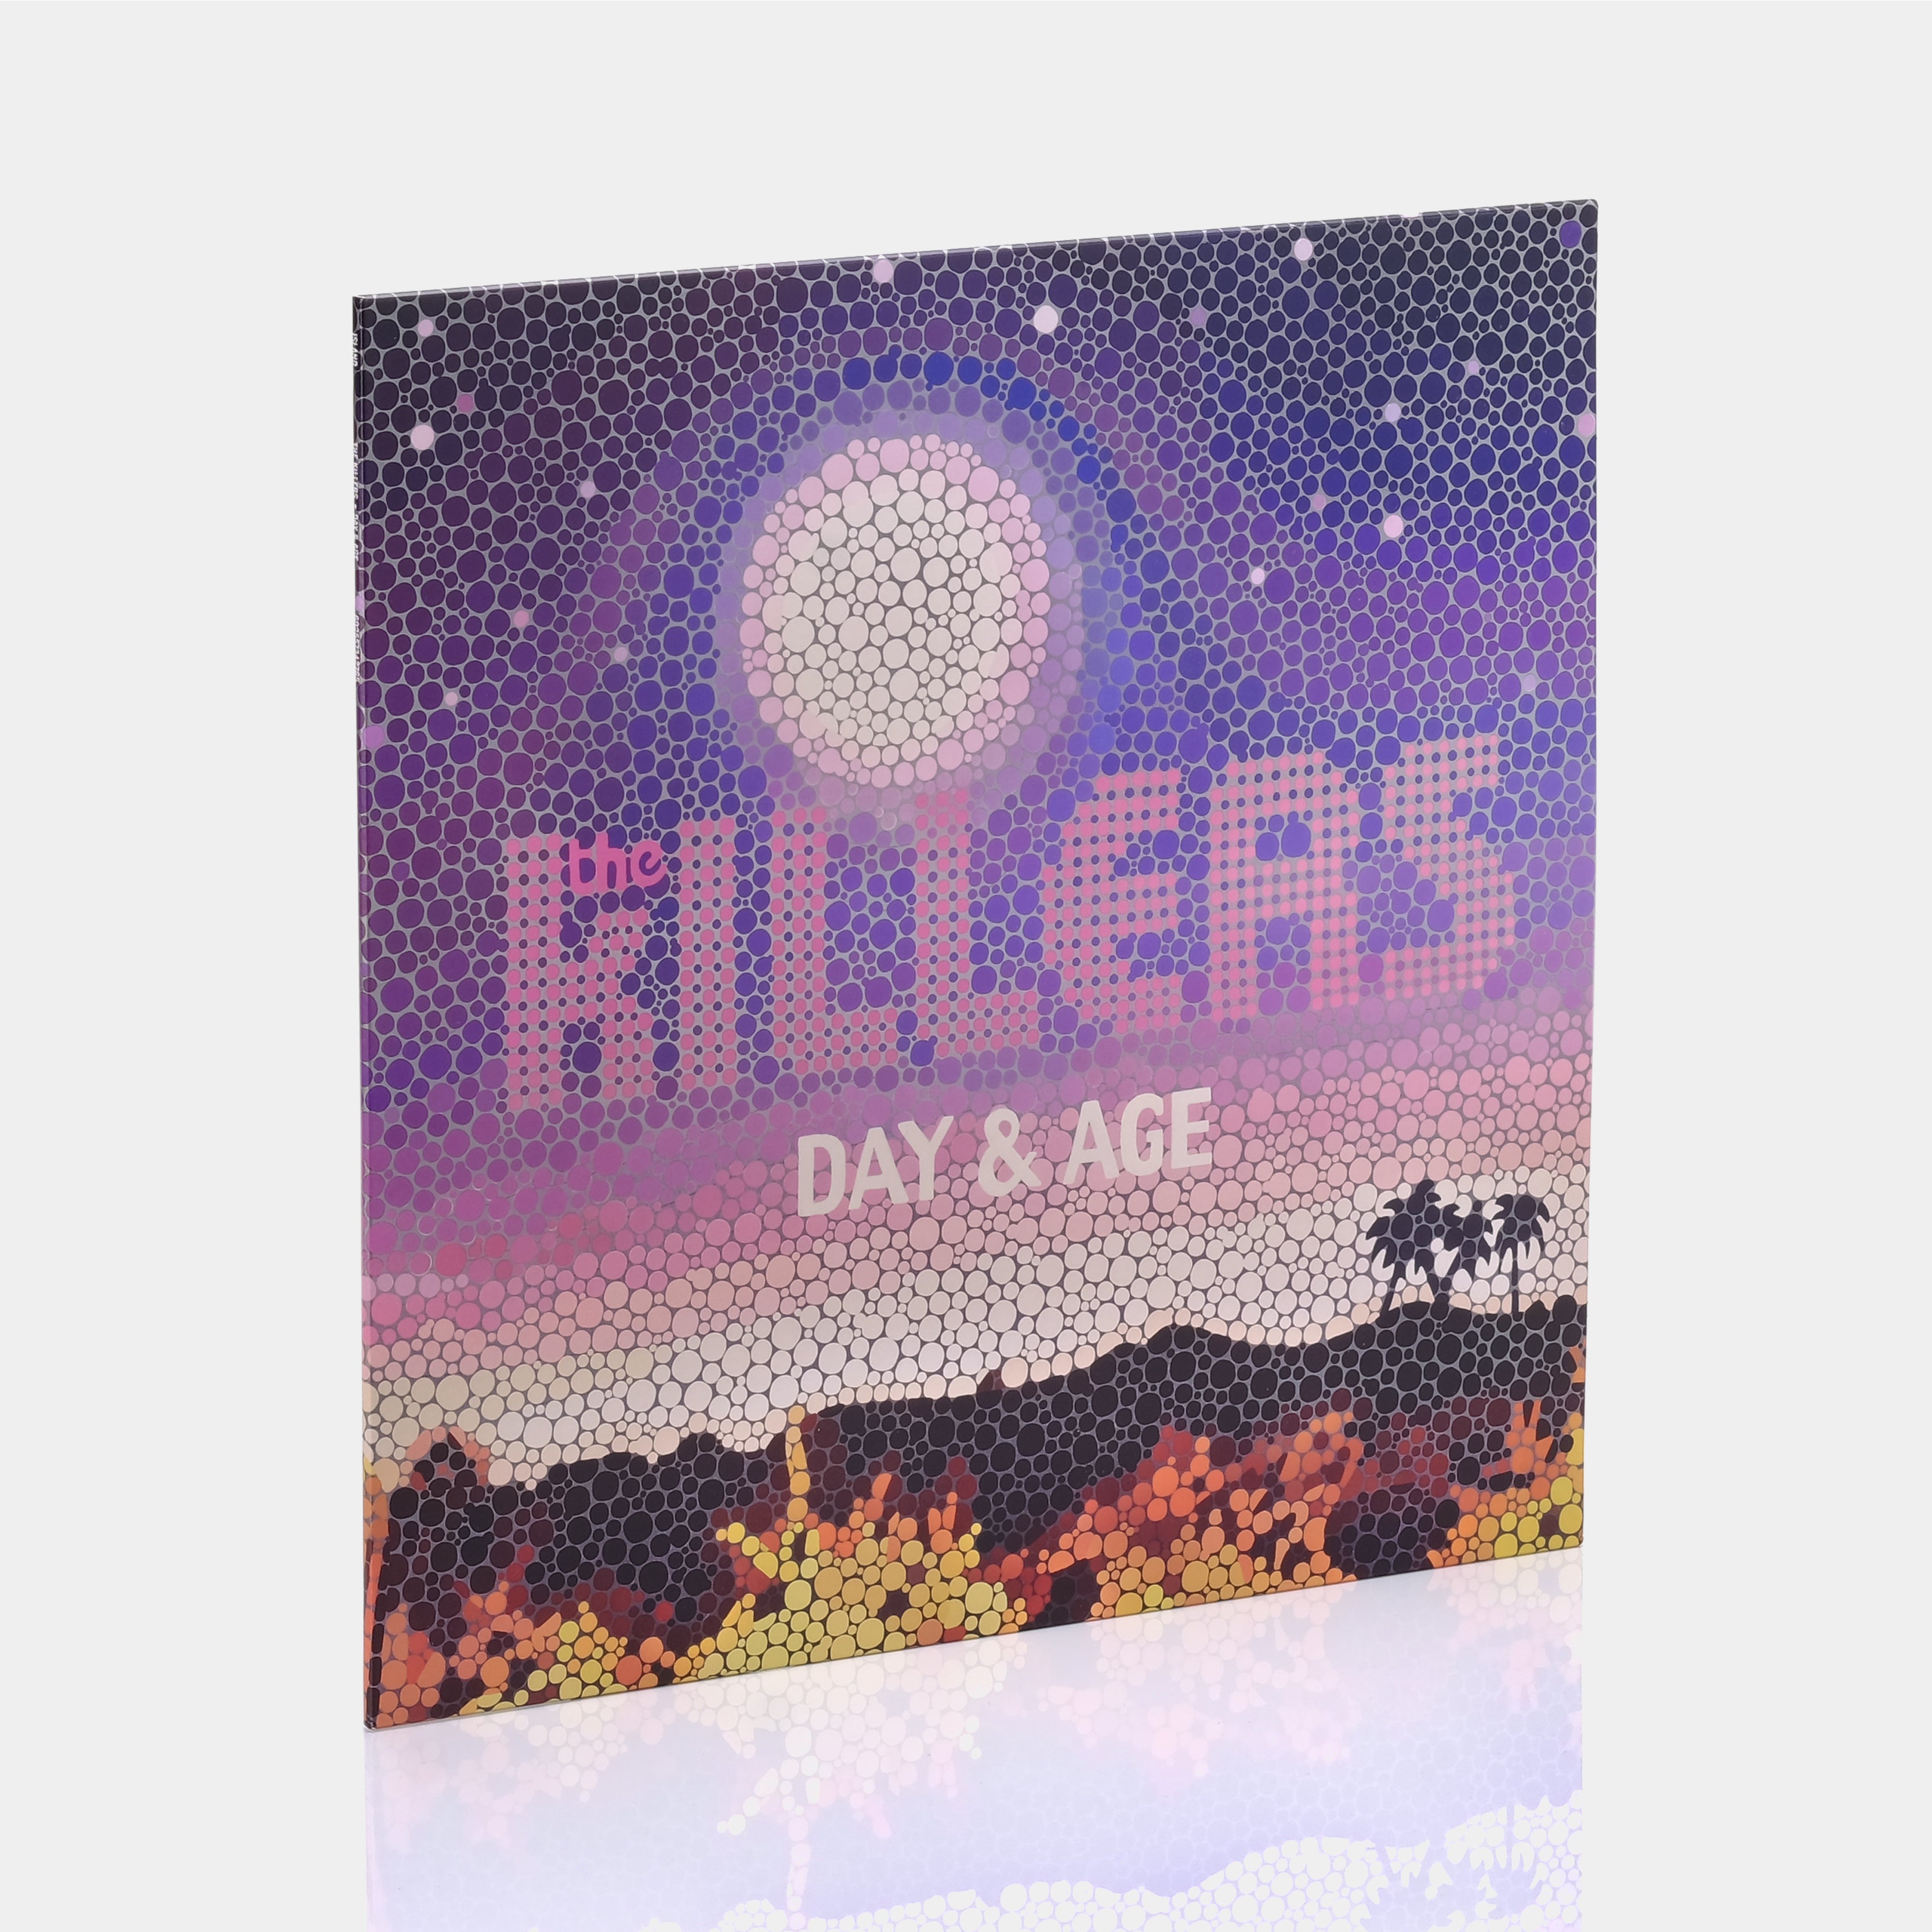 The Killers - Day & Age LP Vinyl Record